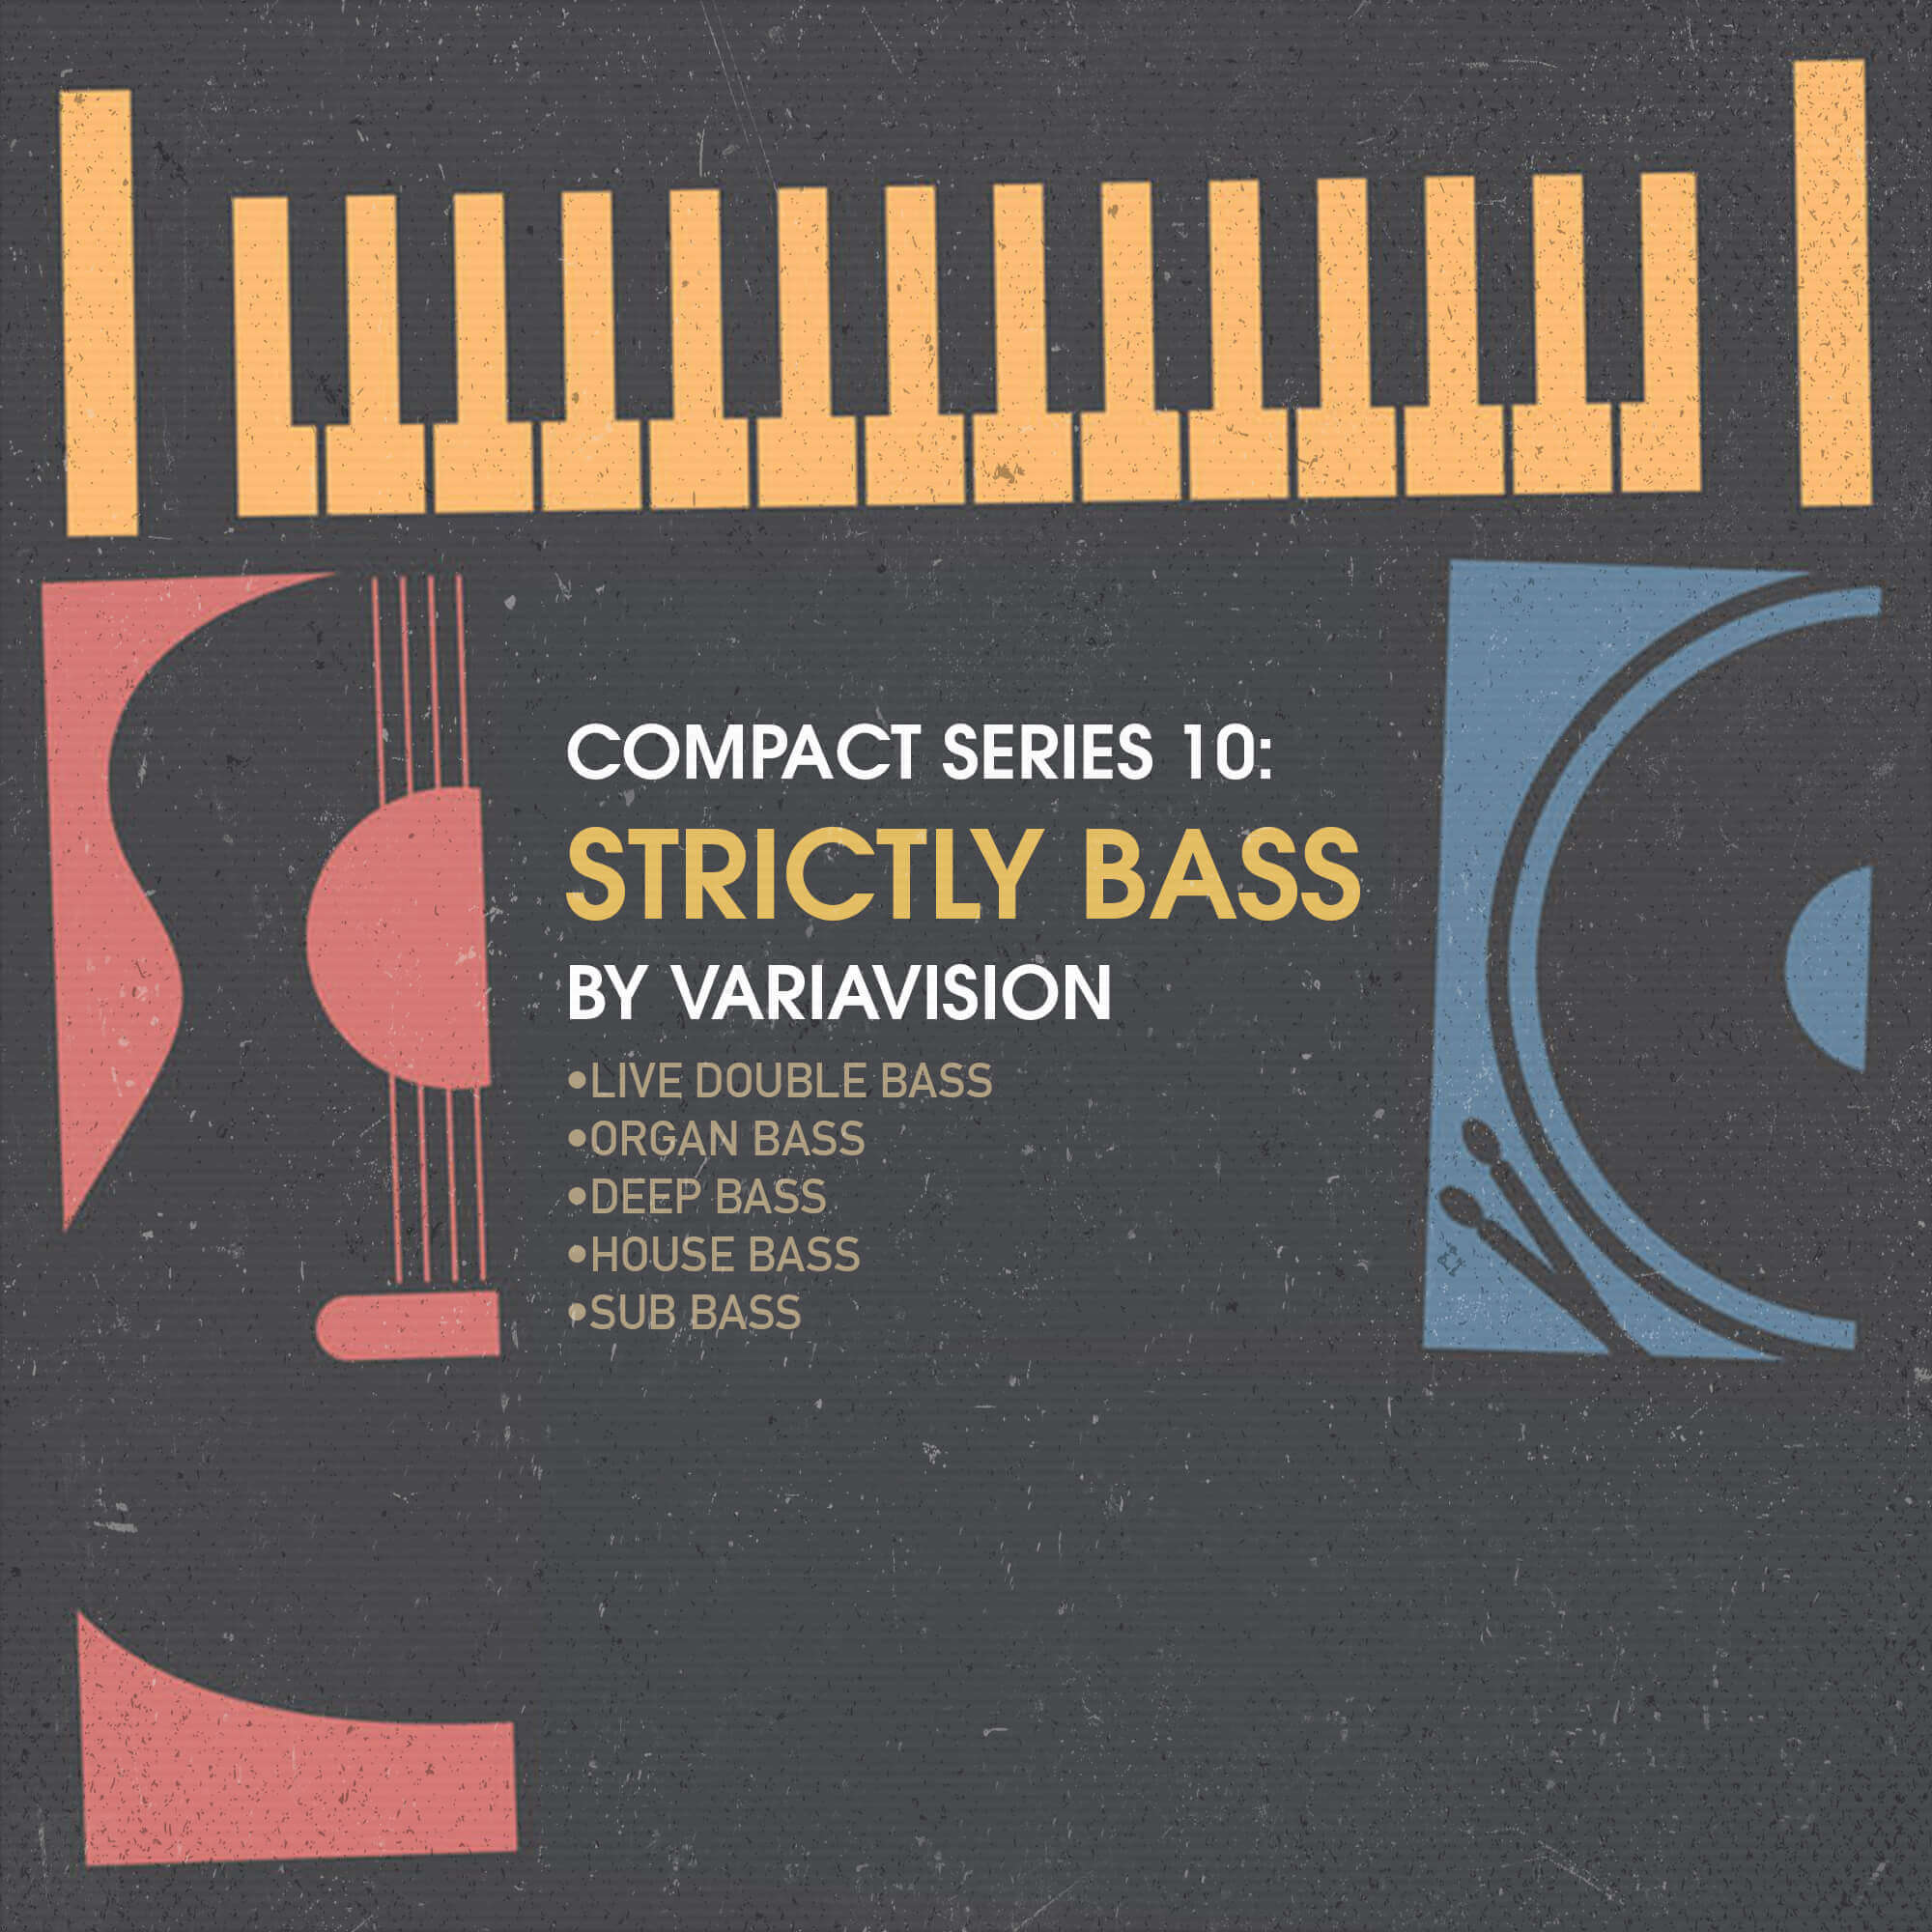 Compact-Series-10-Strictly-Bass-by-Variavision-1.jpg